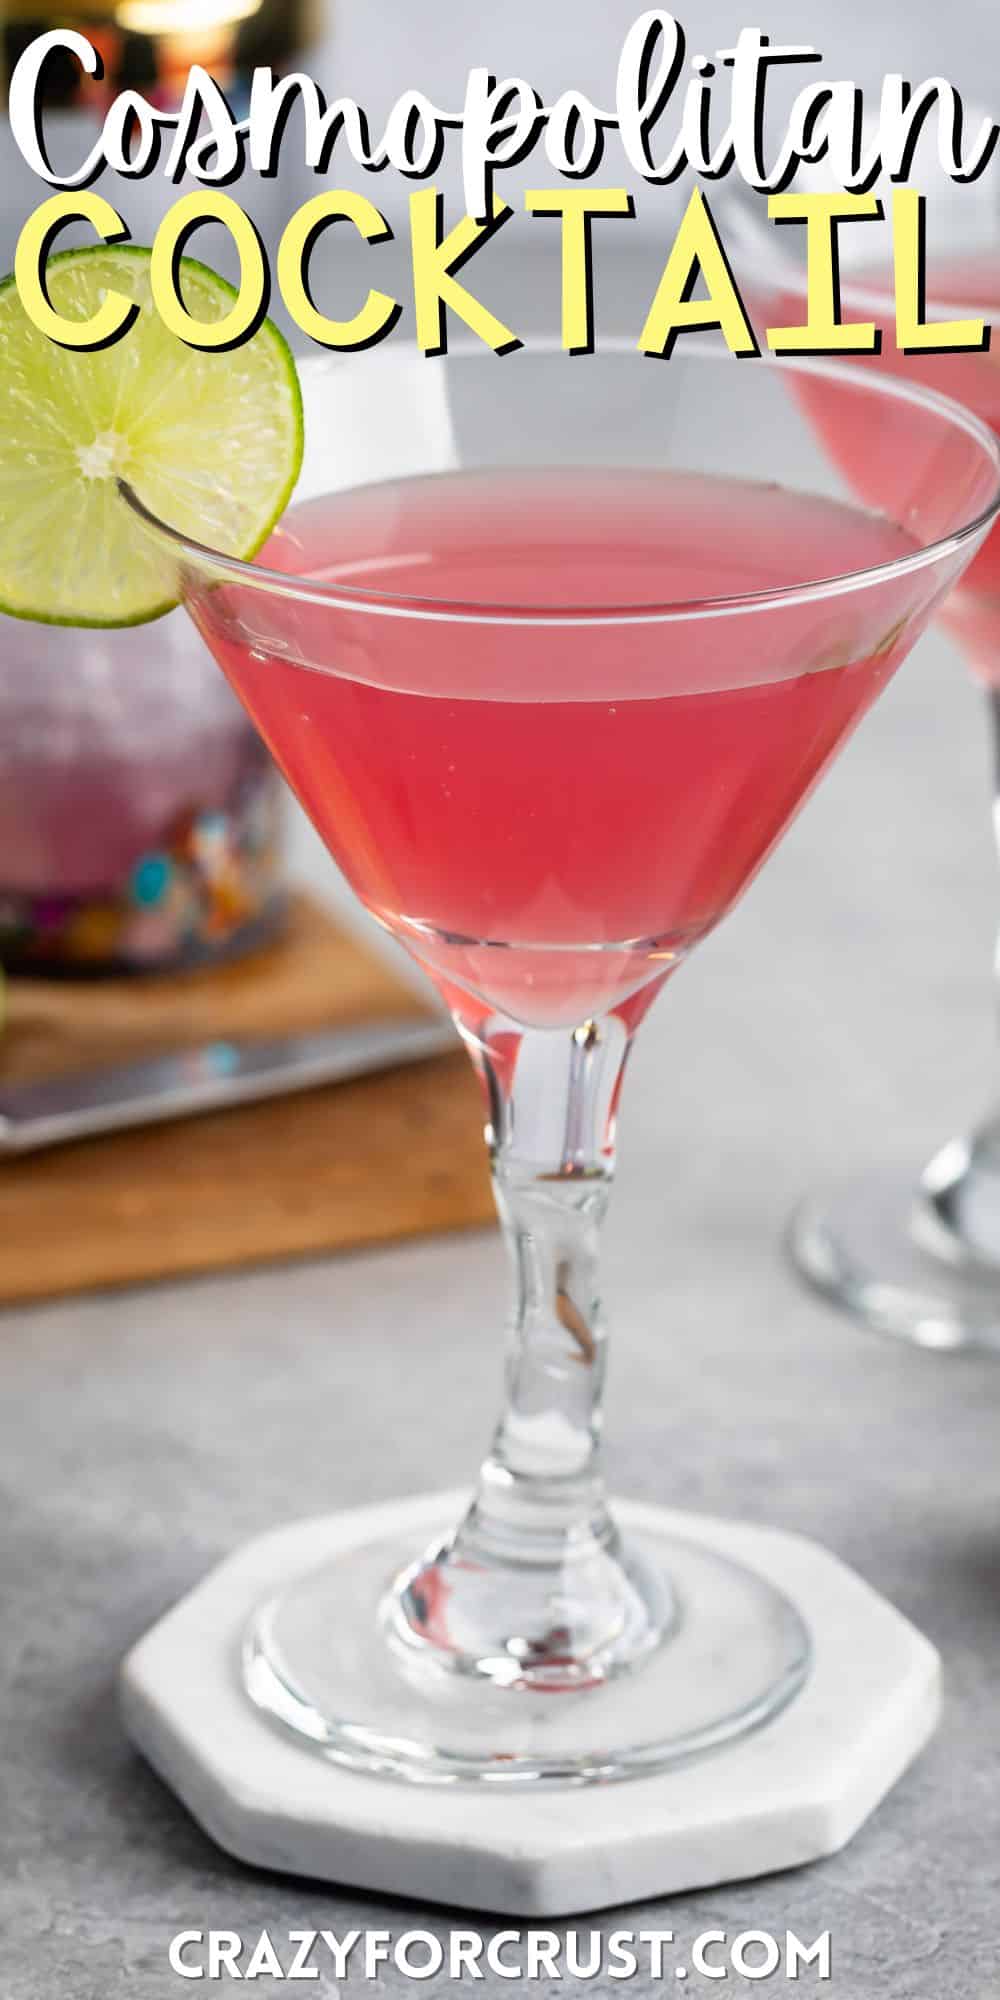 pink drink in a clear glass with a sliced lime on the edge with words on the image.